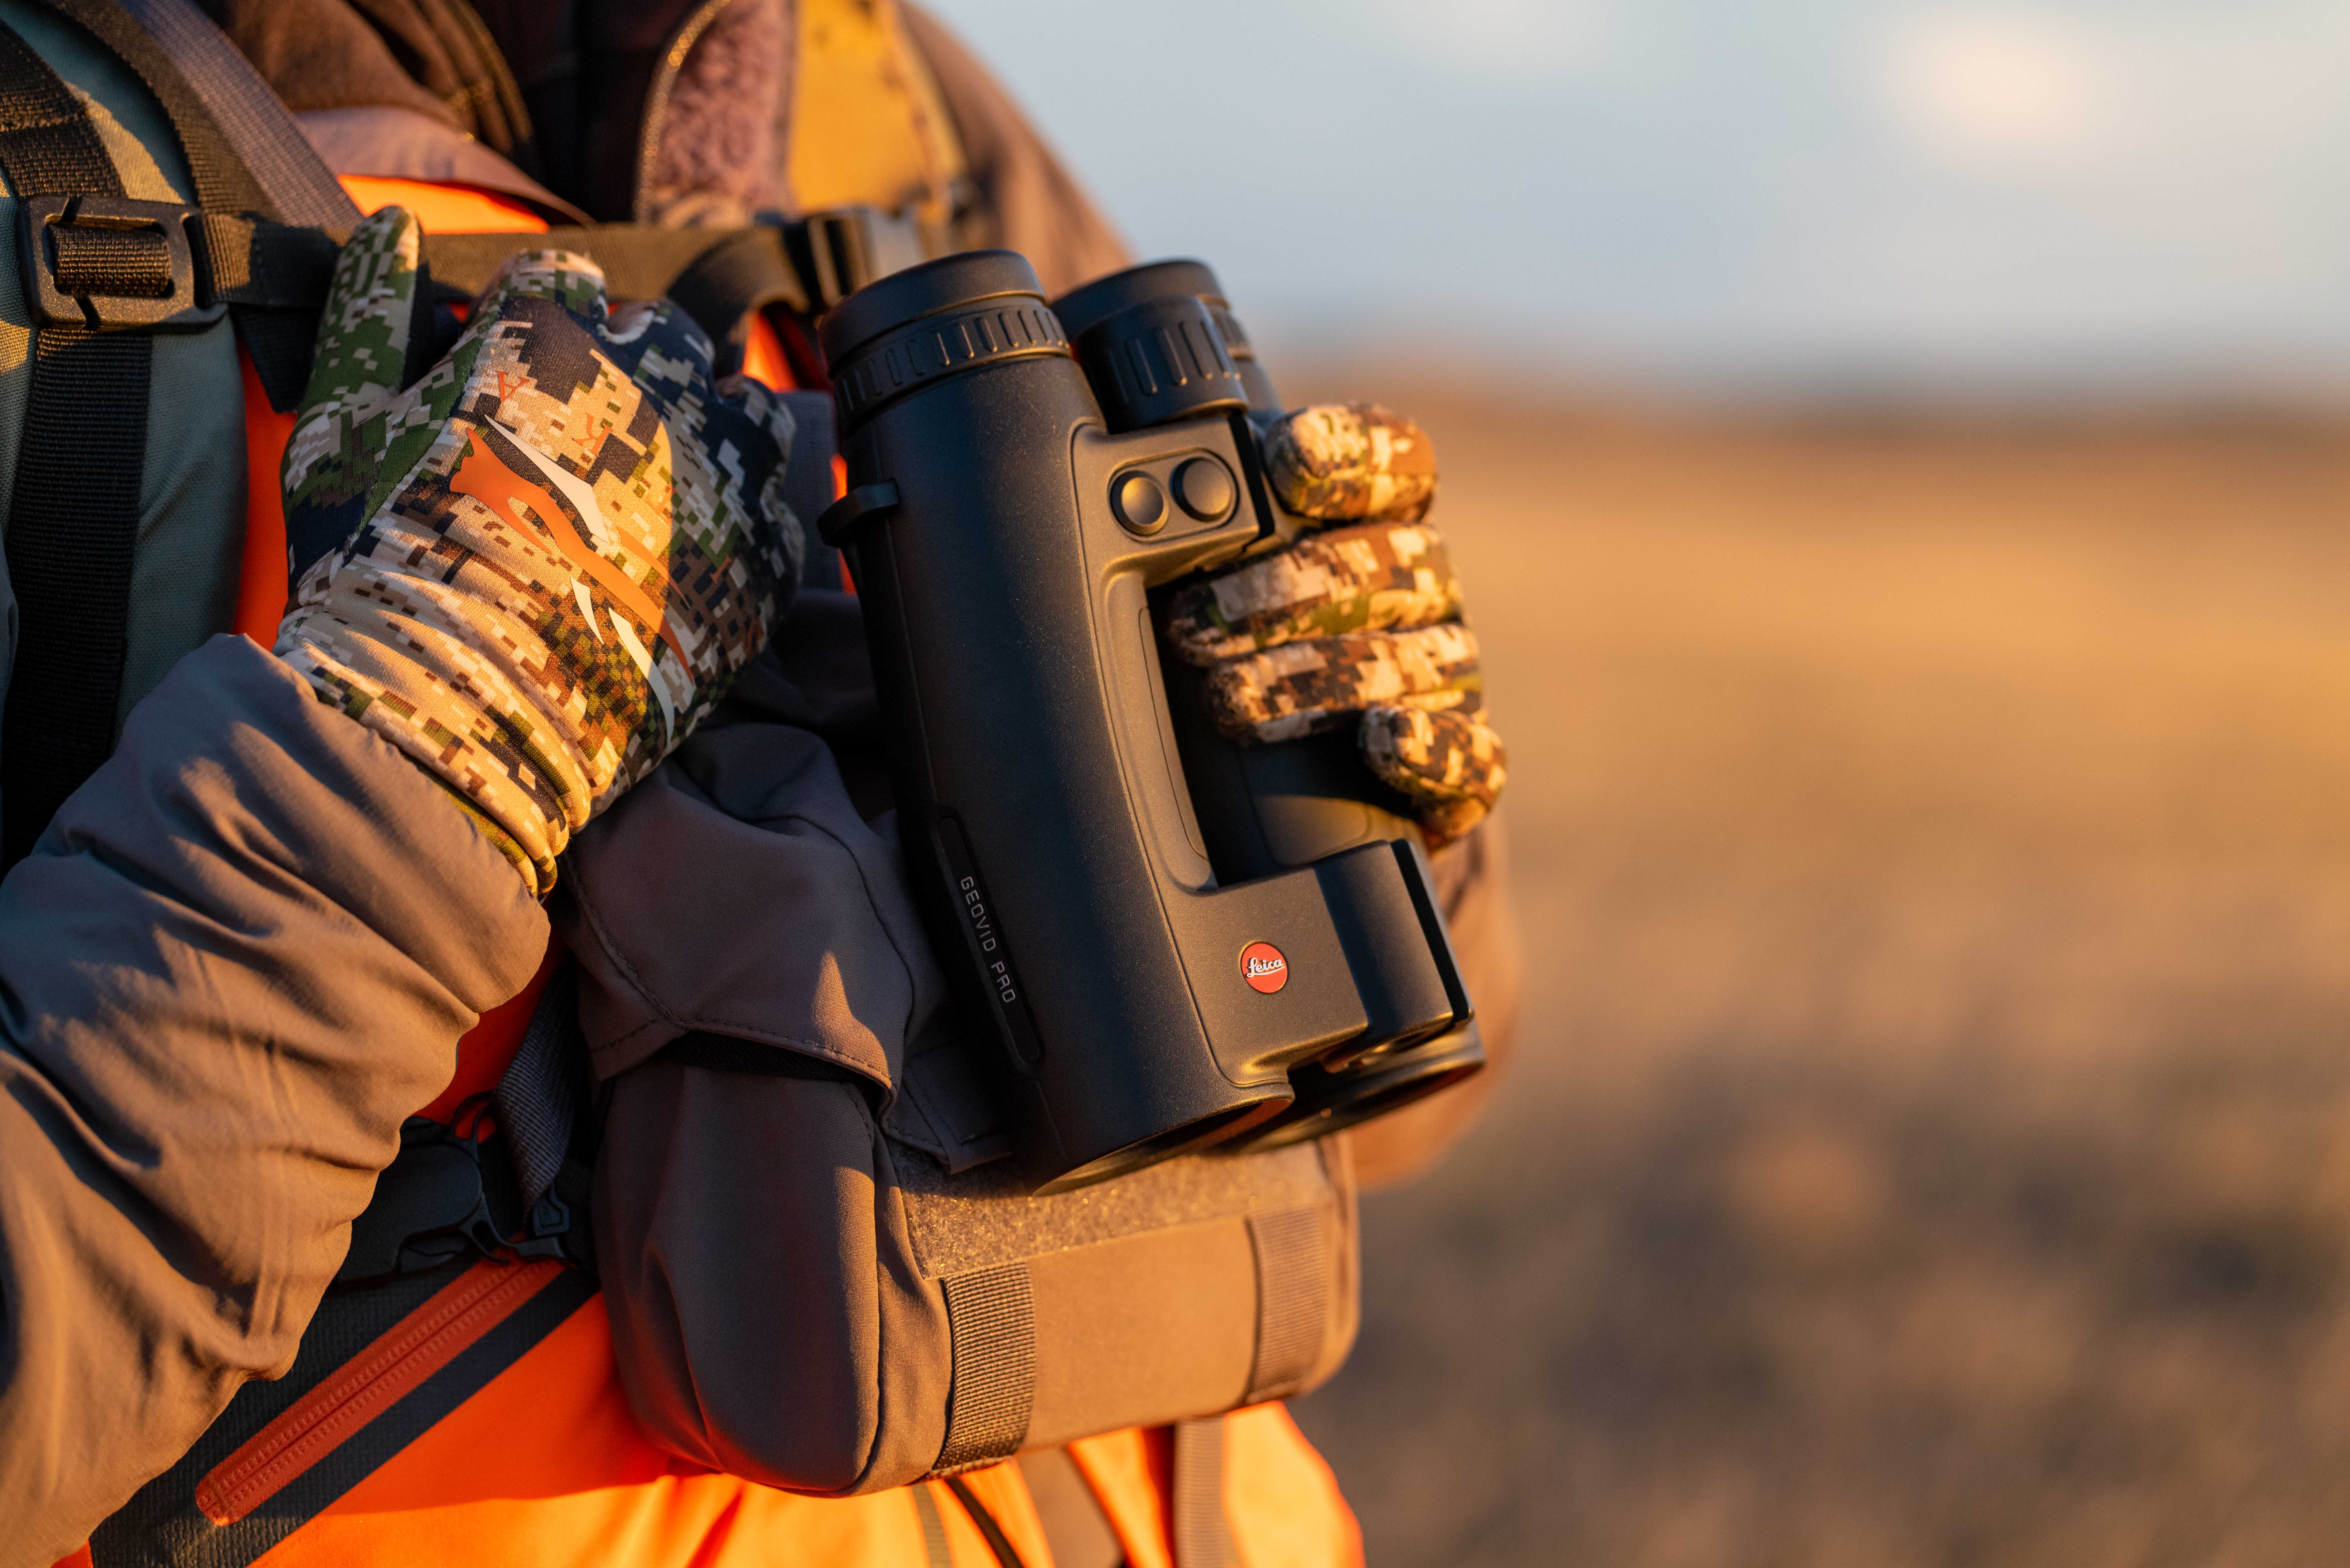 Introducing the New Leica Geovid Pro Models